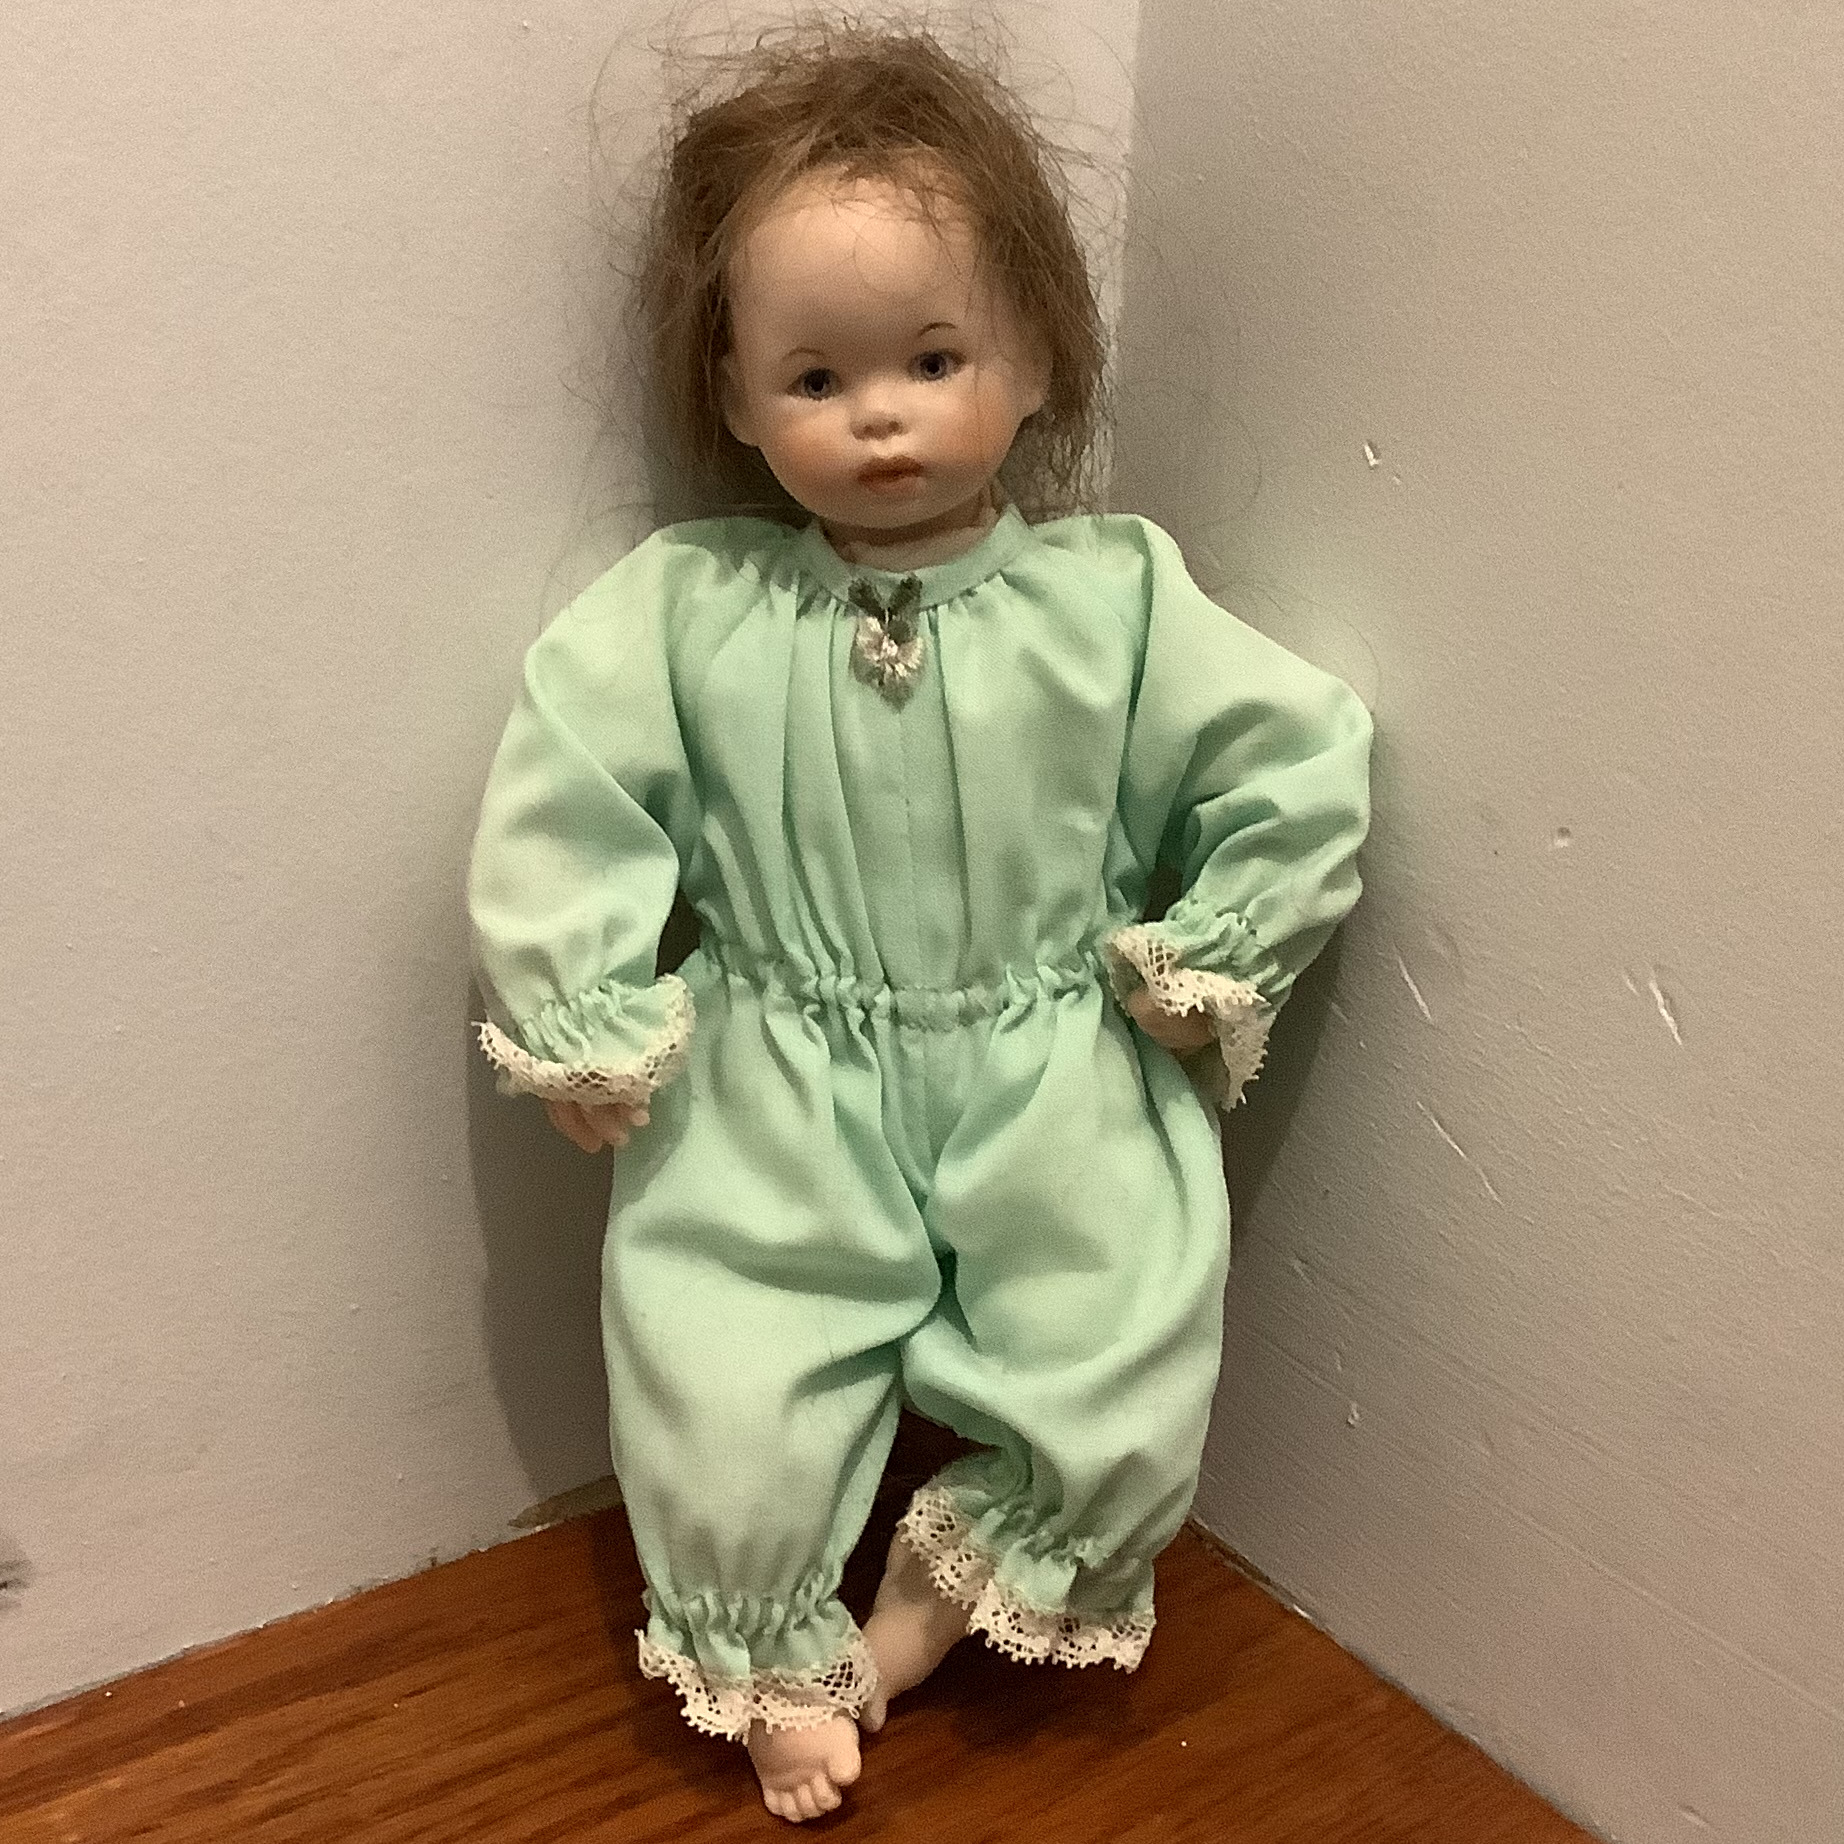 Modern 8 and a half inch baby doll with messy medium brown wig and green sleeper